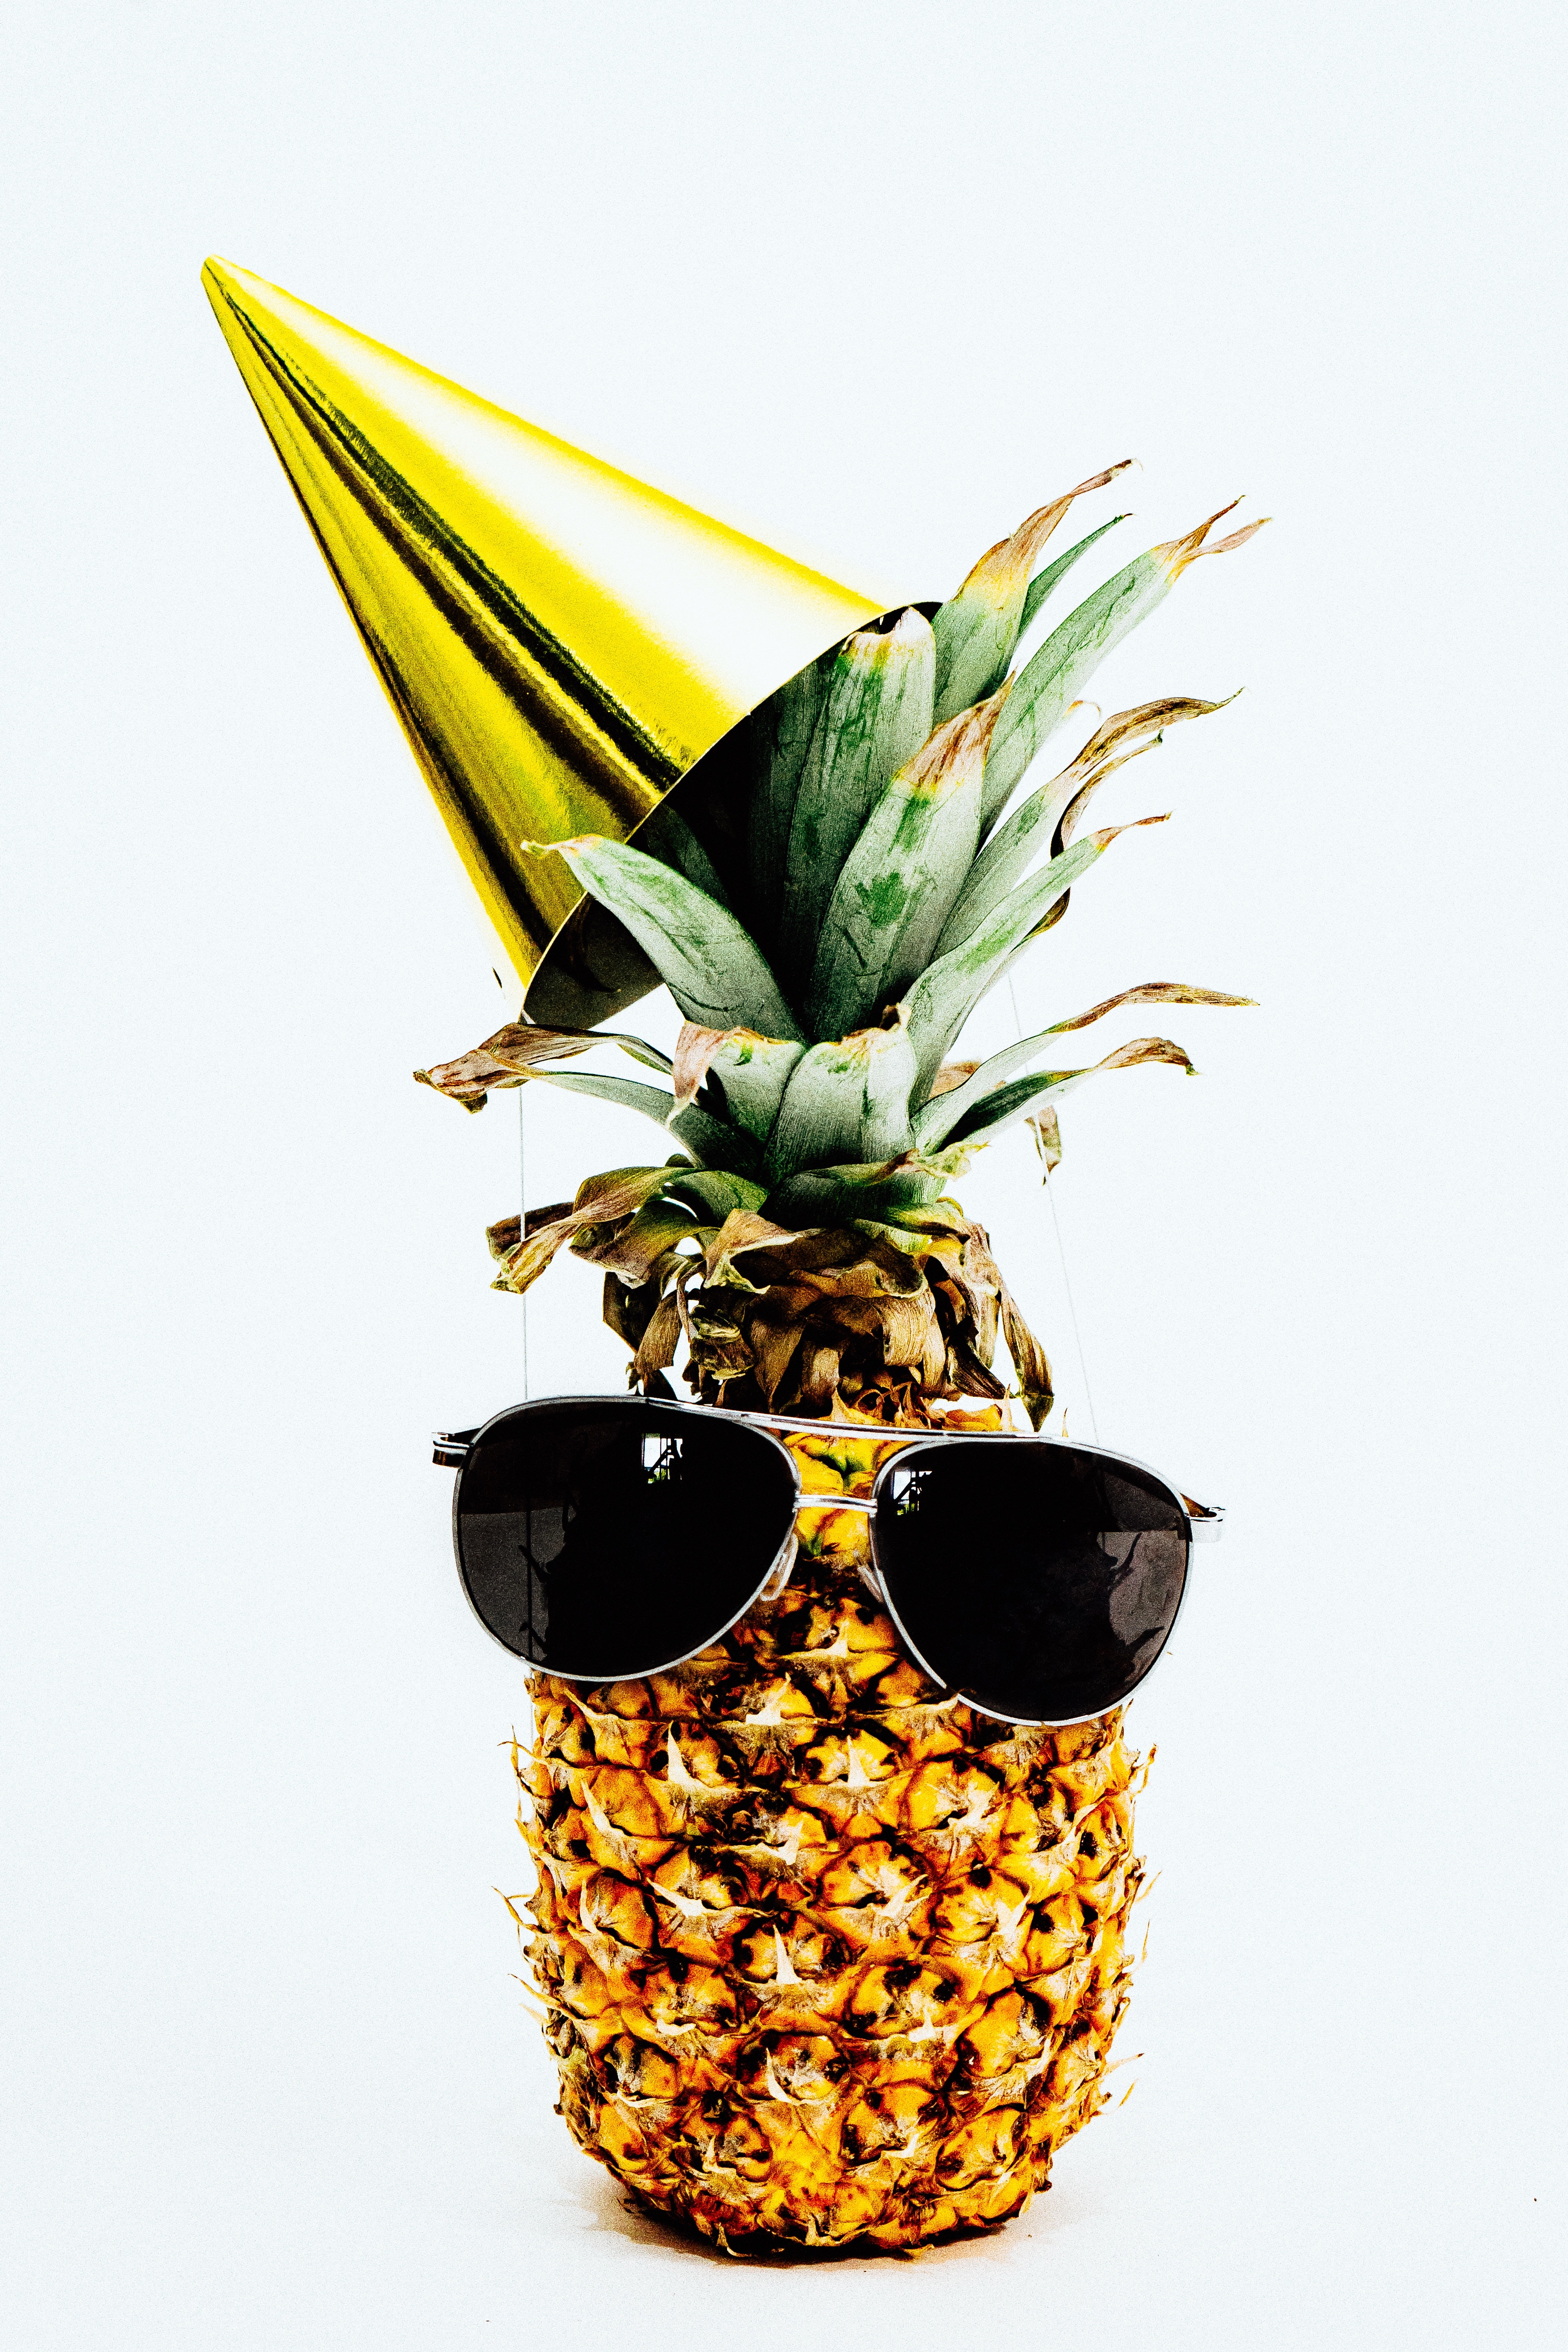 pineapple wearing sunglasses and party hat